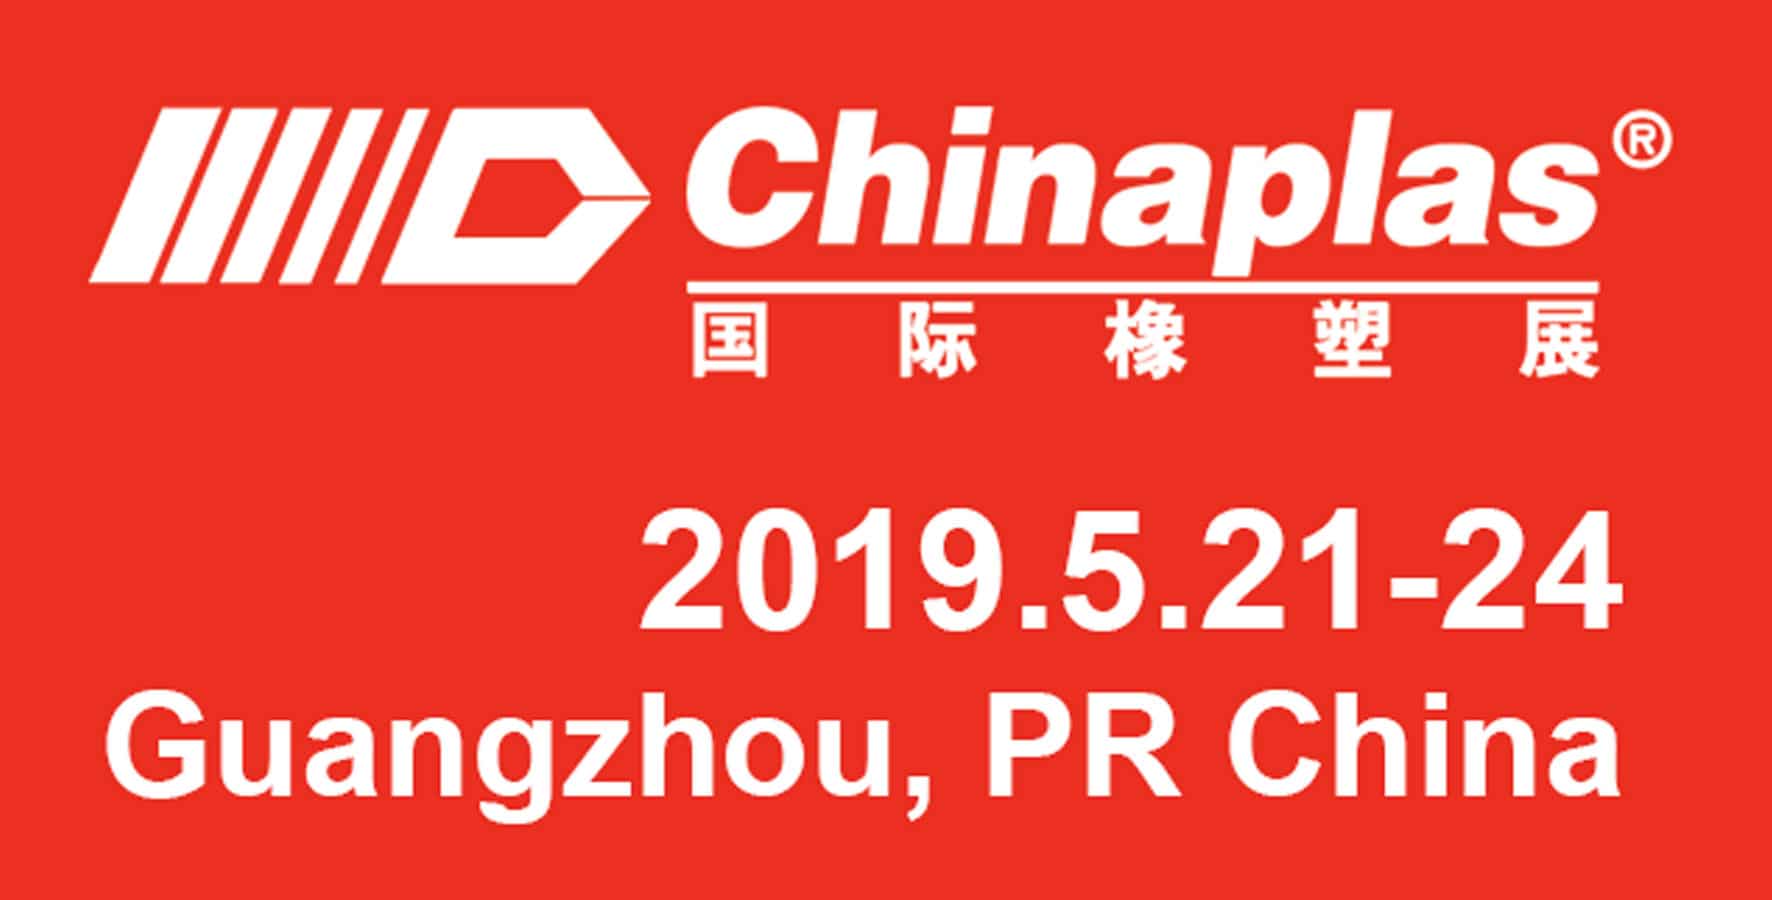 Swiss thermoforming technology at CHINAPLAS 2019